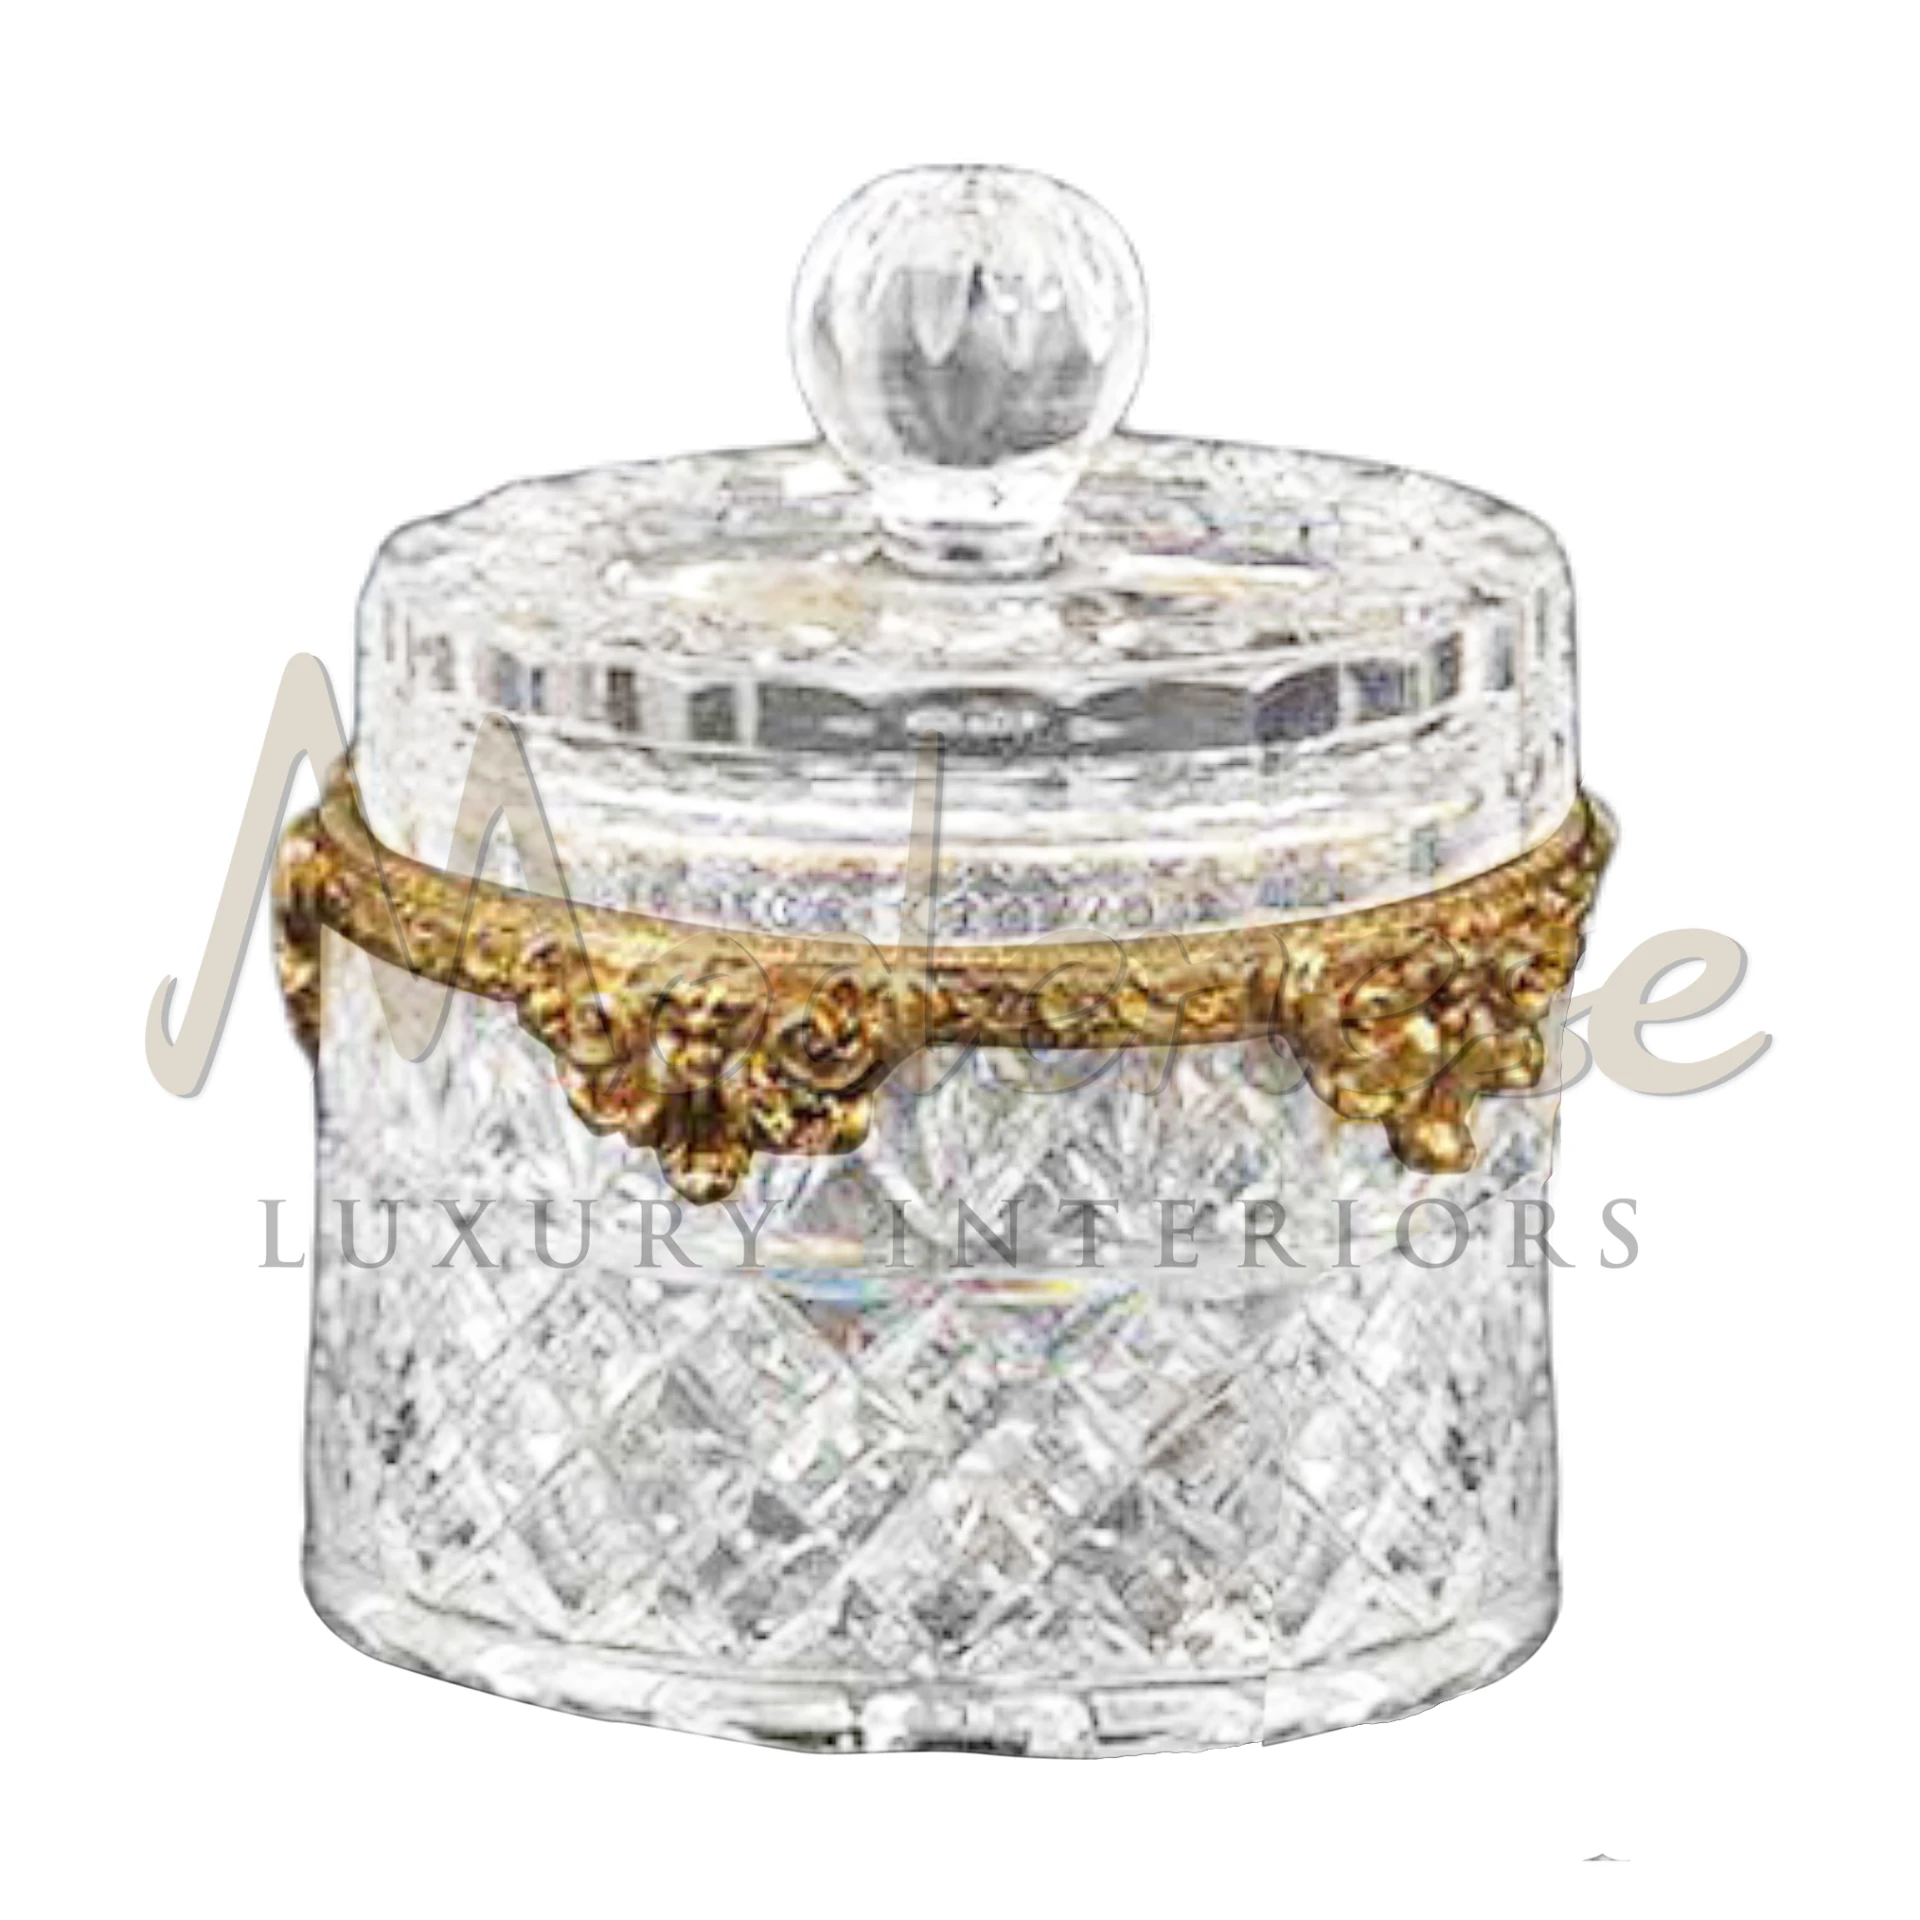 Traditional Glass Box, elegantly designed with etchings and gold/silver accents, ideal for storing and displaying items in a luxurious interior setting.